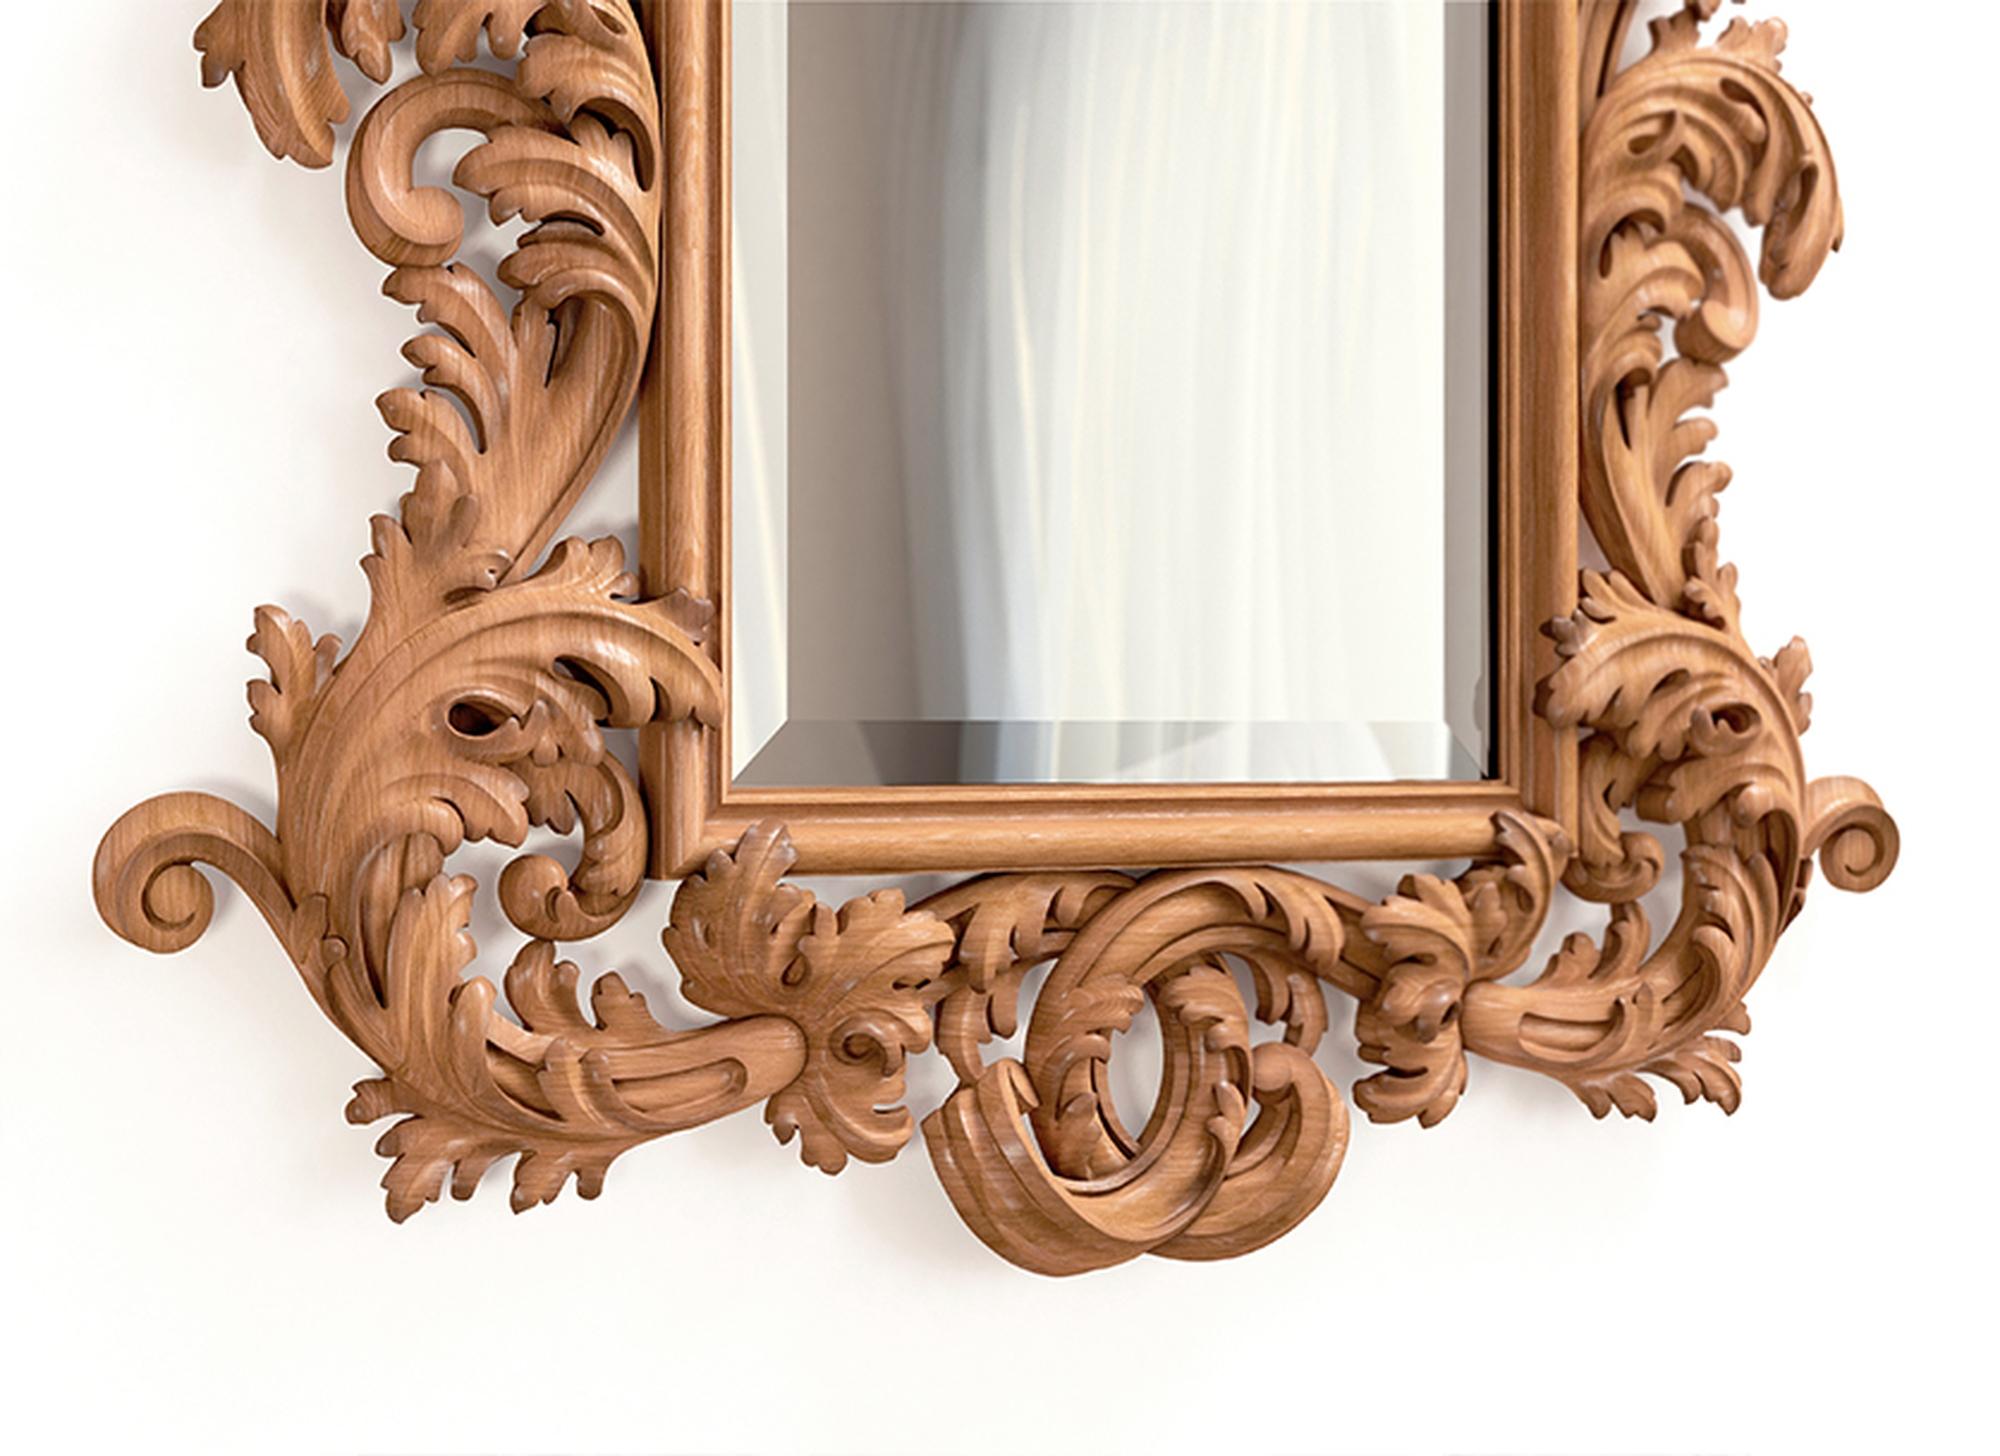 Unfinished high quality wood carving mirror frame from oak or beech of your choice.

>> SKU-017

>> Dimensions (A x B x C x D x E):

- 48.35